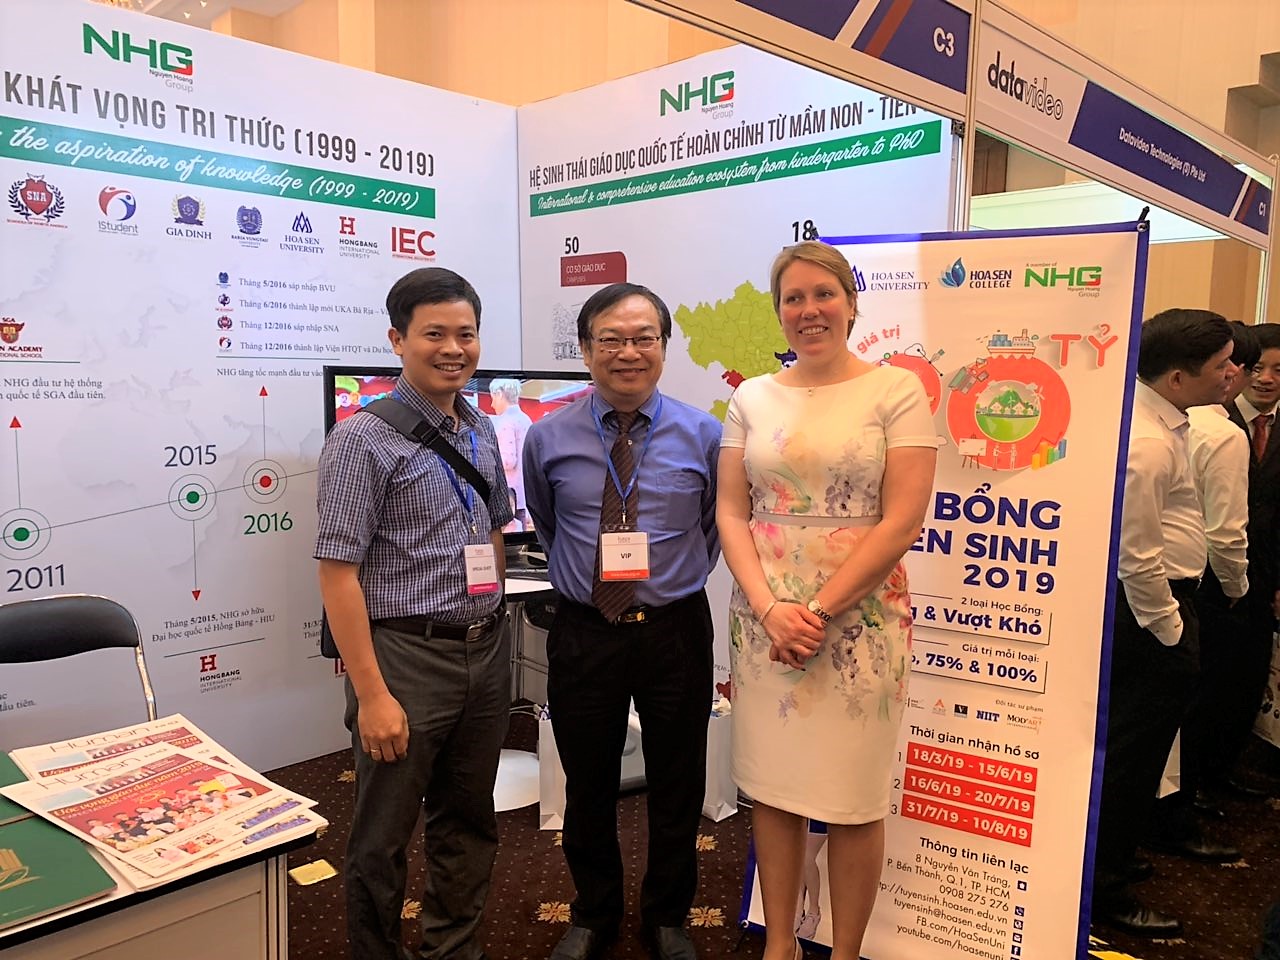 Dr. Dinh Quang Nuong, Deputy CEO of NHG taking photo with Ms. Caronline Wright,Director General of BESA at NHG’s booth 